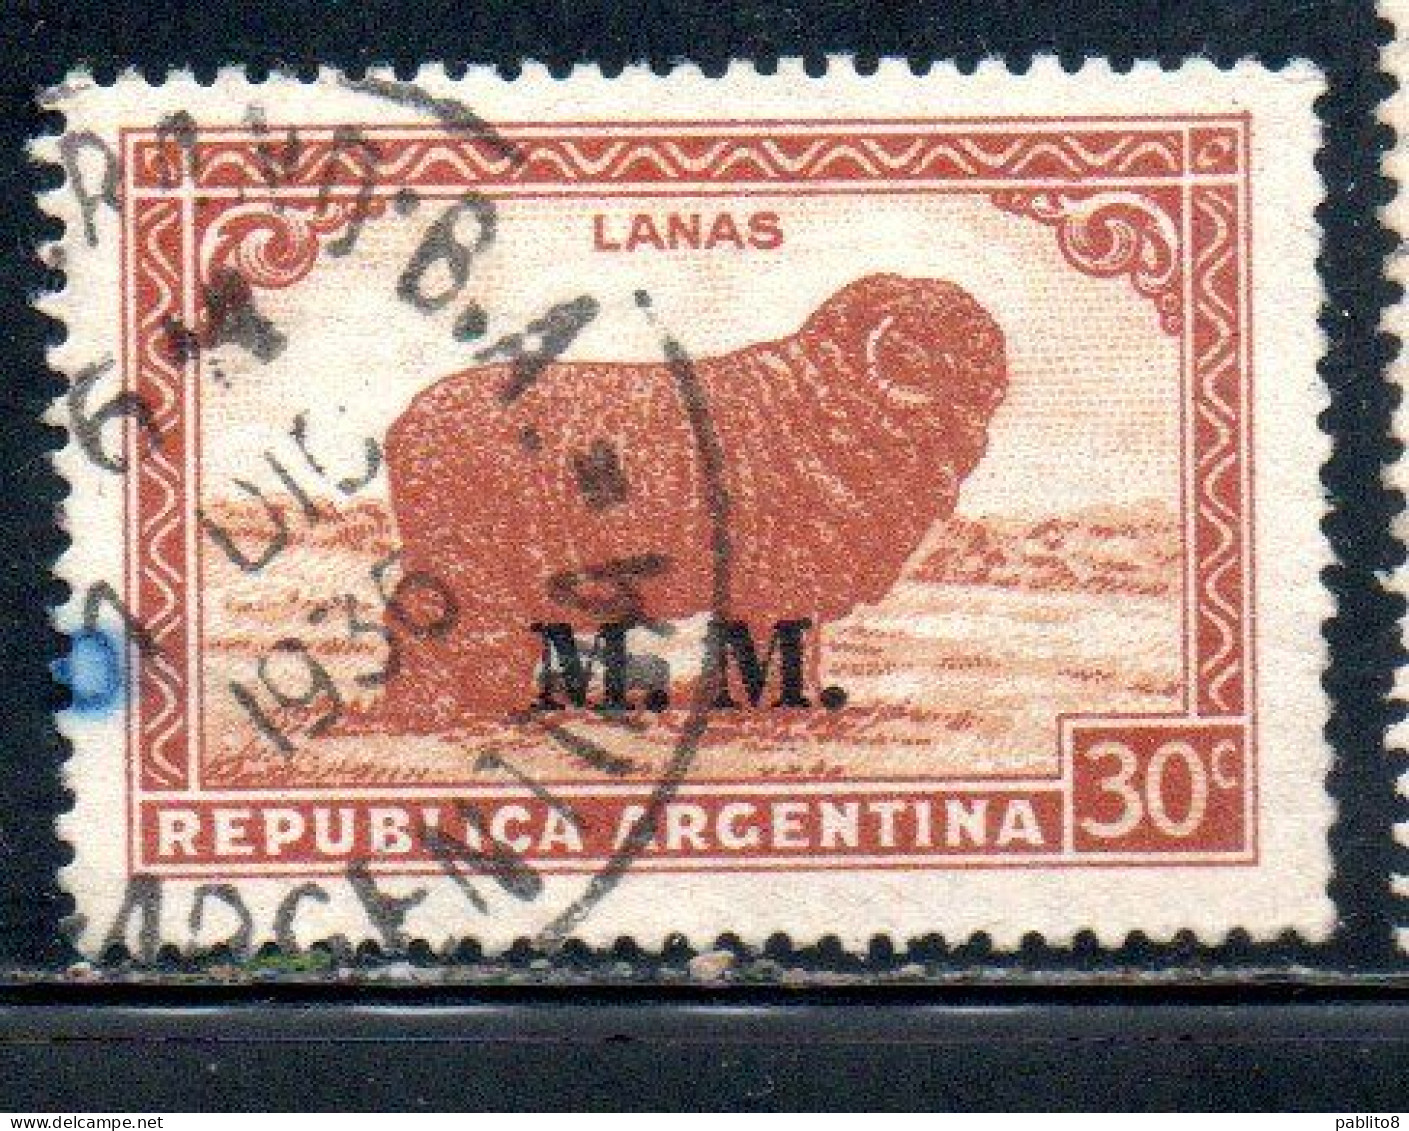 ARGENTINA 1935 1937 OFFICIAL DEPARTMENT STAMP OVERPRINTED M.M. MINISTRY OF MARINE MM 30c USED USADO - Oficiales